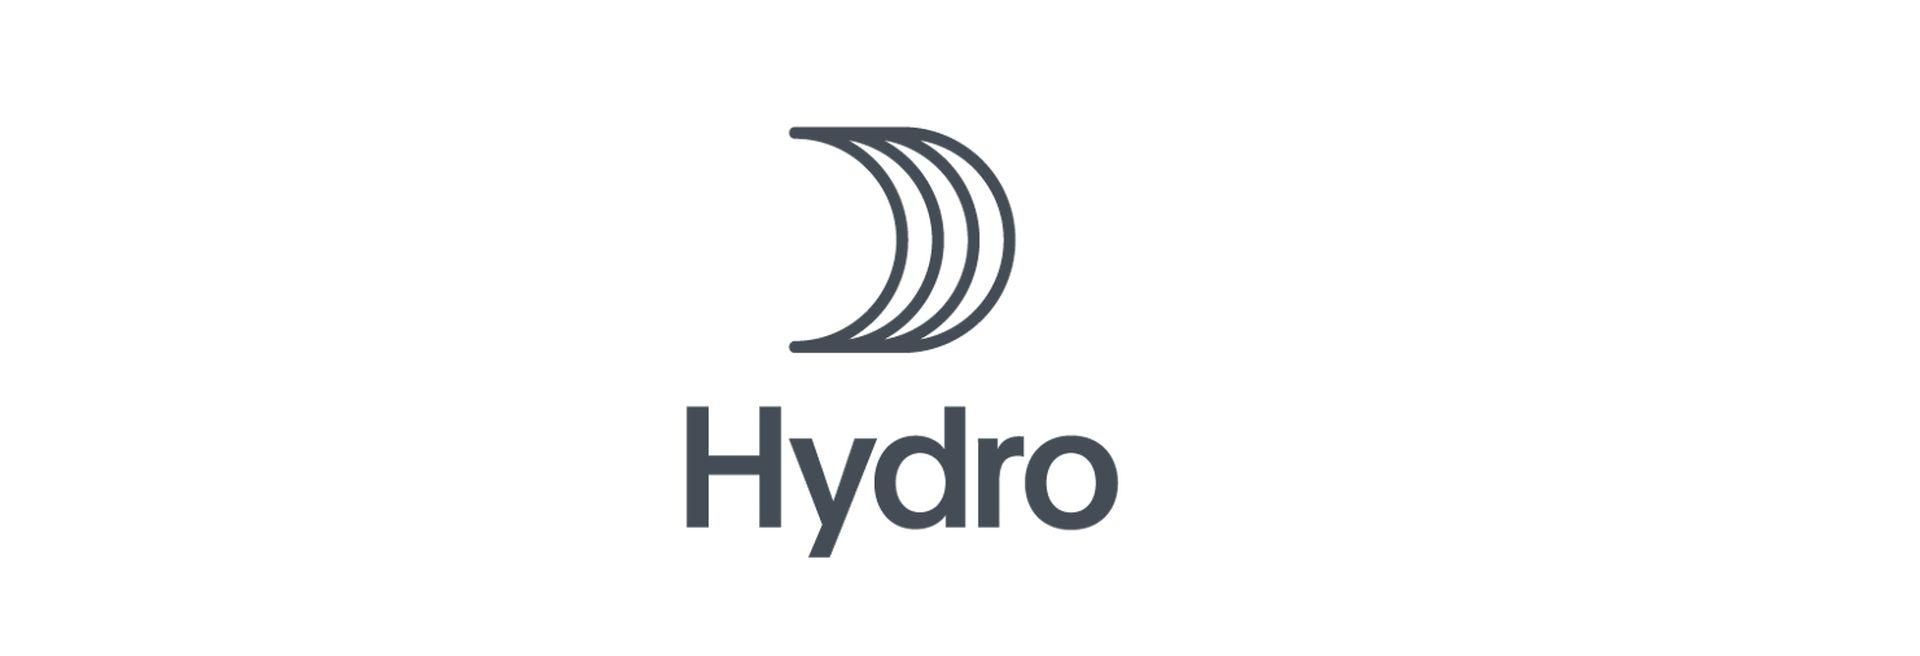 The aluminium components manufacturer Hydro is to launch yet another investment in Székesfehérvár